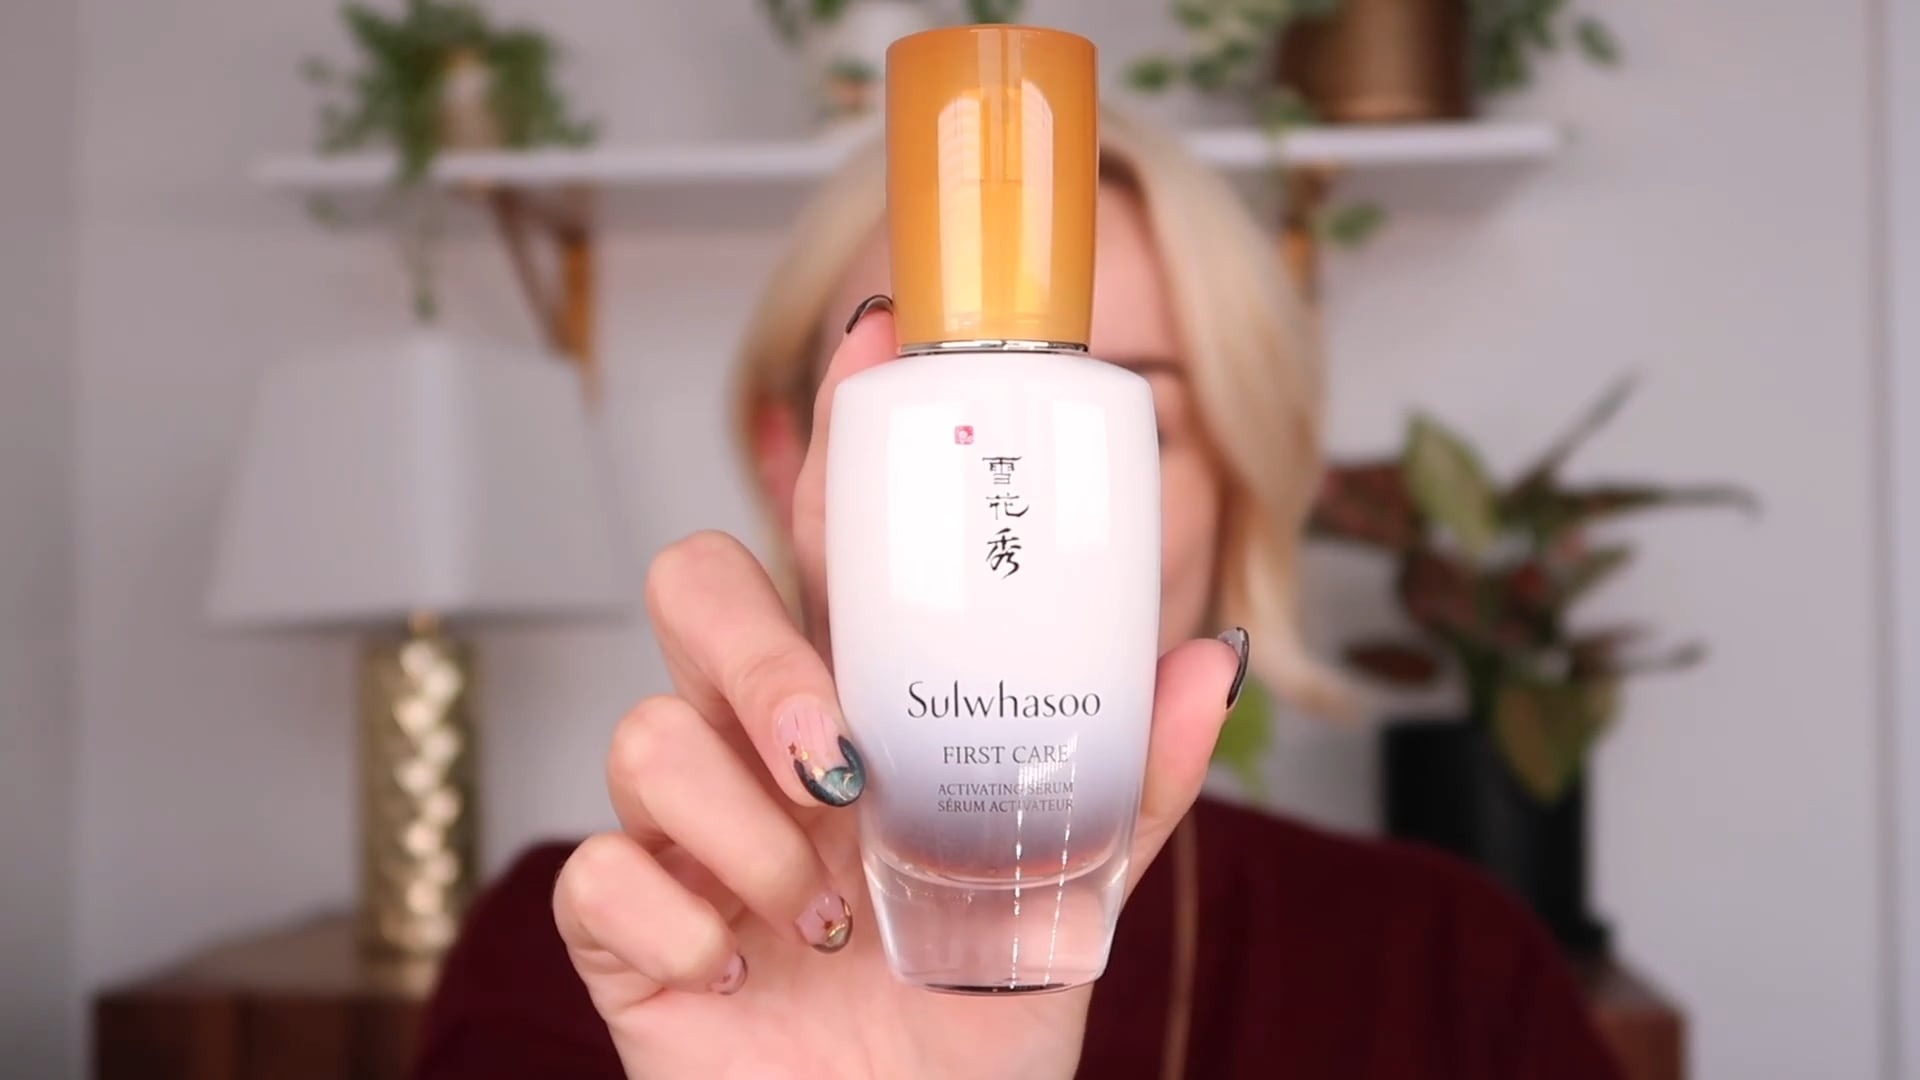 tinh chat duong da sulwhasoo first care activating serum